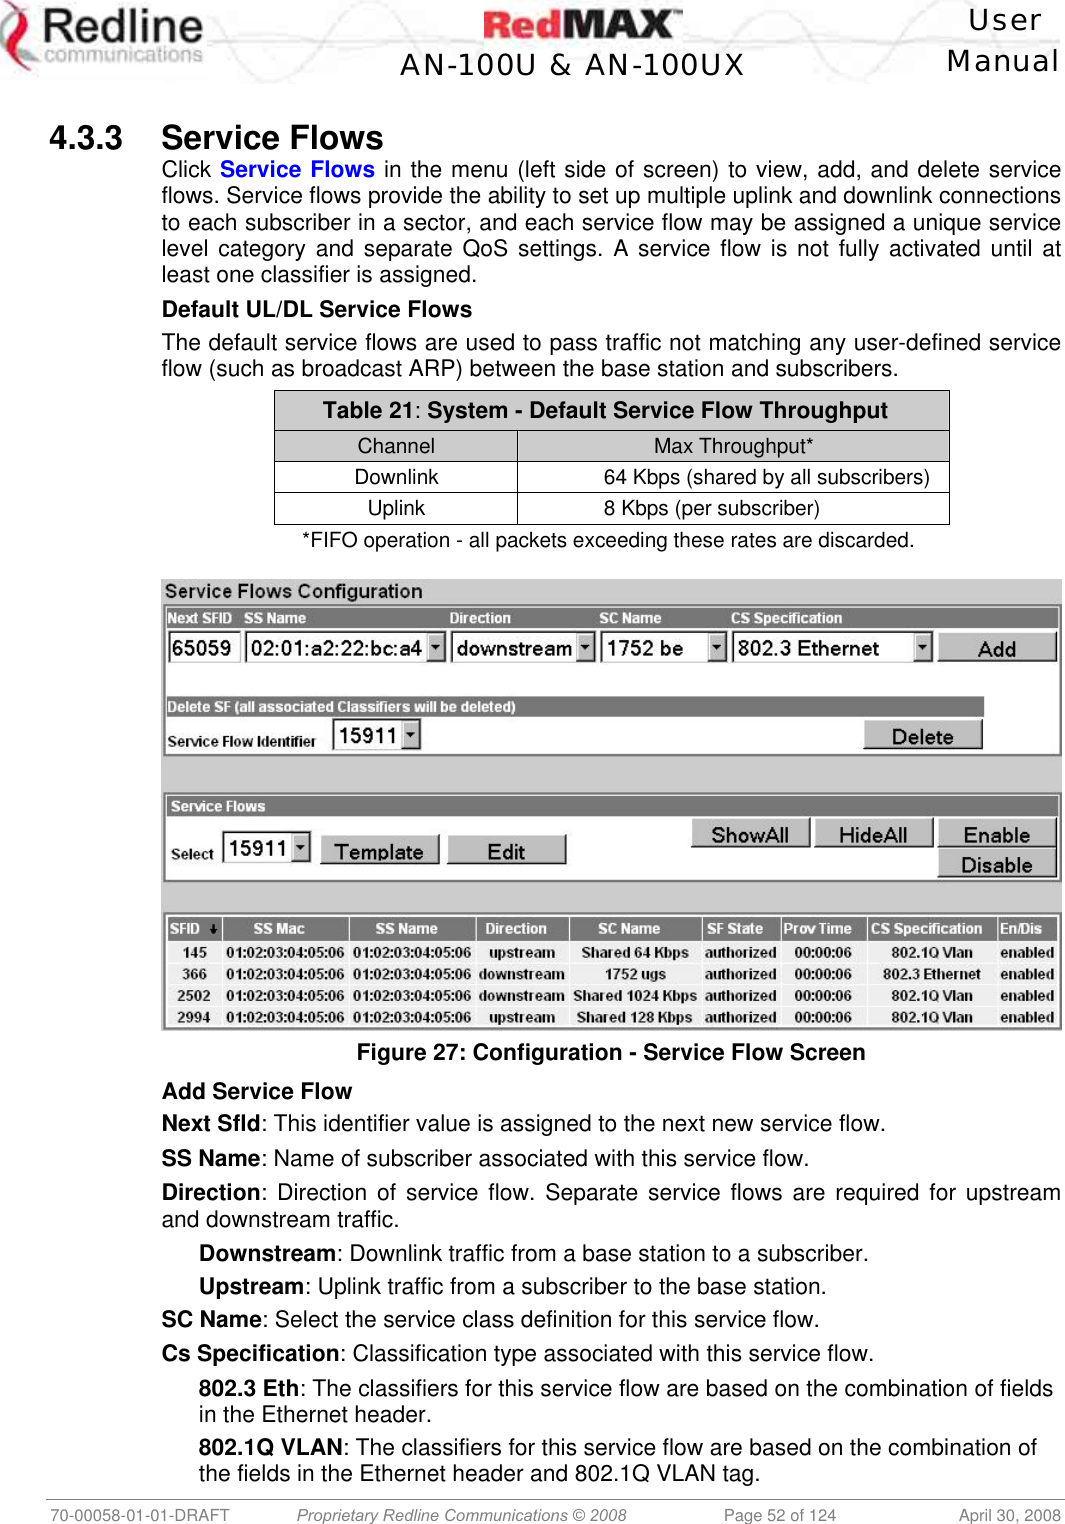    User  AN-100U &amp; AN-100UX Manual   70-00058-01-01-DRAFT  Proprietary Redline Communications © 2008   Page 52 of 124  April 30, 2008  4.3.3 Service Flows Click Service Flows in the menu (left side of screen) to view, add, and delete service flows. Service flows provide the ability to set up multiple uplink and downlink connections to each subscriber in a sector, and each service flow may be assigned a unique service level category and separate QoS settings. A service flow is not fully activated until at least one classifier is assigned. Default UL/DL Service Flows The default service flows are used to pass traffic not matching any user-defined service flow (such as broadcast ARP) between the base station and subscribers. Table 21: System - Default Service Flow Throughput Channel   Max Throughput* Downlink    64 Kbps (shared by all subscribers) Uplink    8 Kbps (per subscriber) *FIFO operation - all packets exceeding these rates are discarded.   Figure 27: Configuration - Service Flow Screen Add Service Flow Next Sfld: This identifier value is assigned to the next new service flow. SS Name: Name of subscriber associated with this service flow. Direction: Direction of service flow. Separate service flows are required for upstream and downstream traffic. Downstream: Downlink traffic from a base station to a subscriber. Upstream: Uplink traffic from a subscriber to the base station. SC Name: Select the service class definition for this service flow. Cs Specification: Classification type associated with this service flow. 802.3 Eth: The classifiers for this service flow are based on the combination of fields in the Ethernet header. 802.1Q VLAN: The classifiers for this service flow are based on the combination of the fields in the Ethernet header and 802.1Q VLAN tag. 